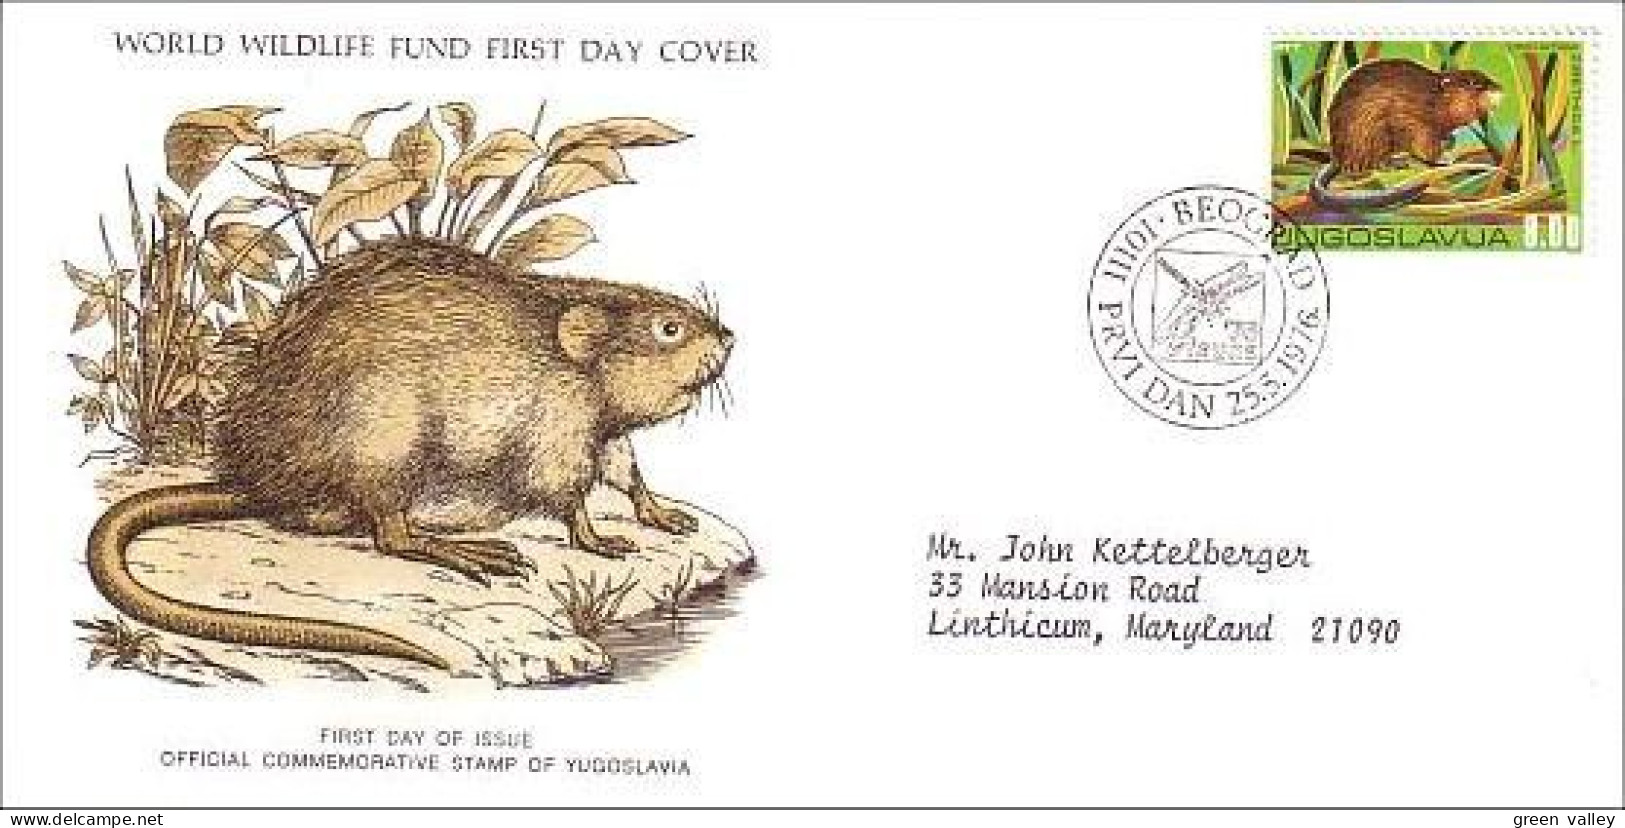 Yougoslavie Rongeur Ondatra Rodent WWF FDC Cover ( A80 99) - Rongeurs